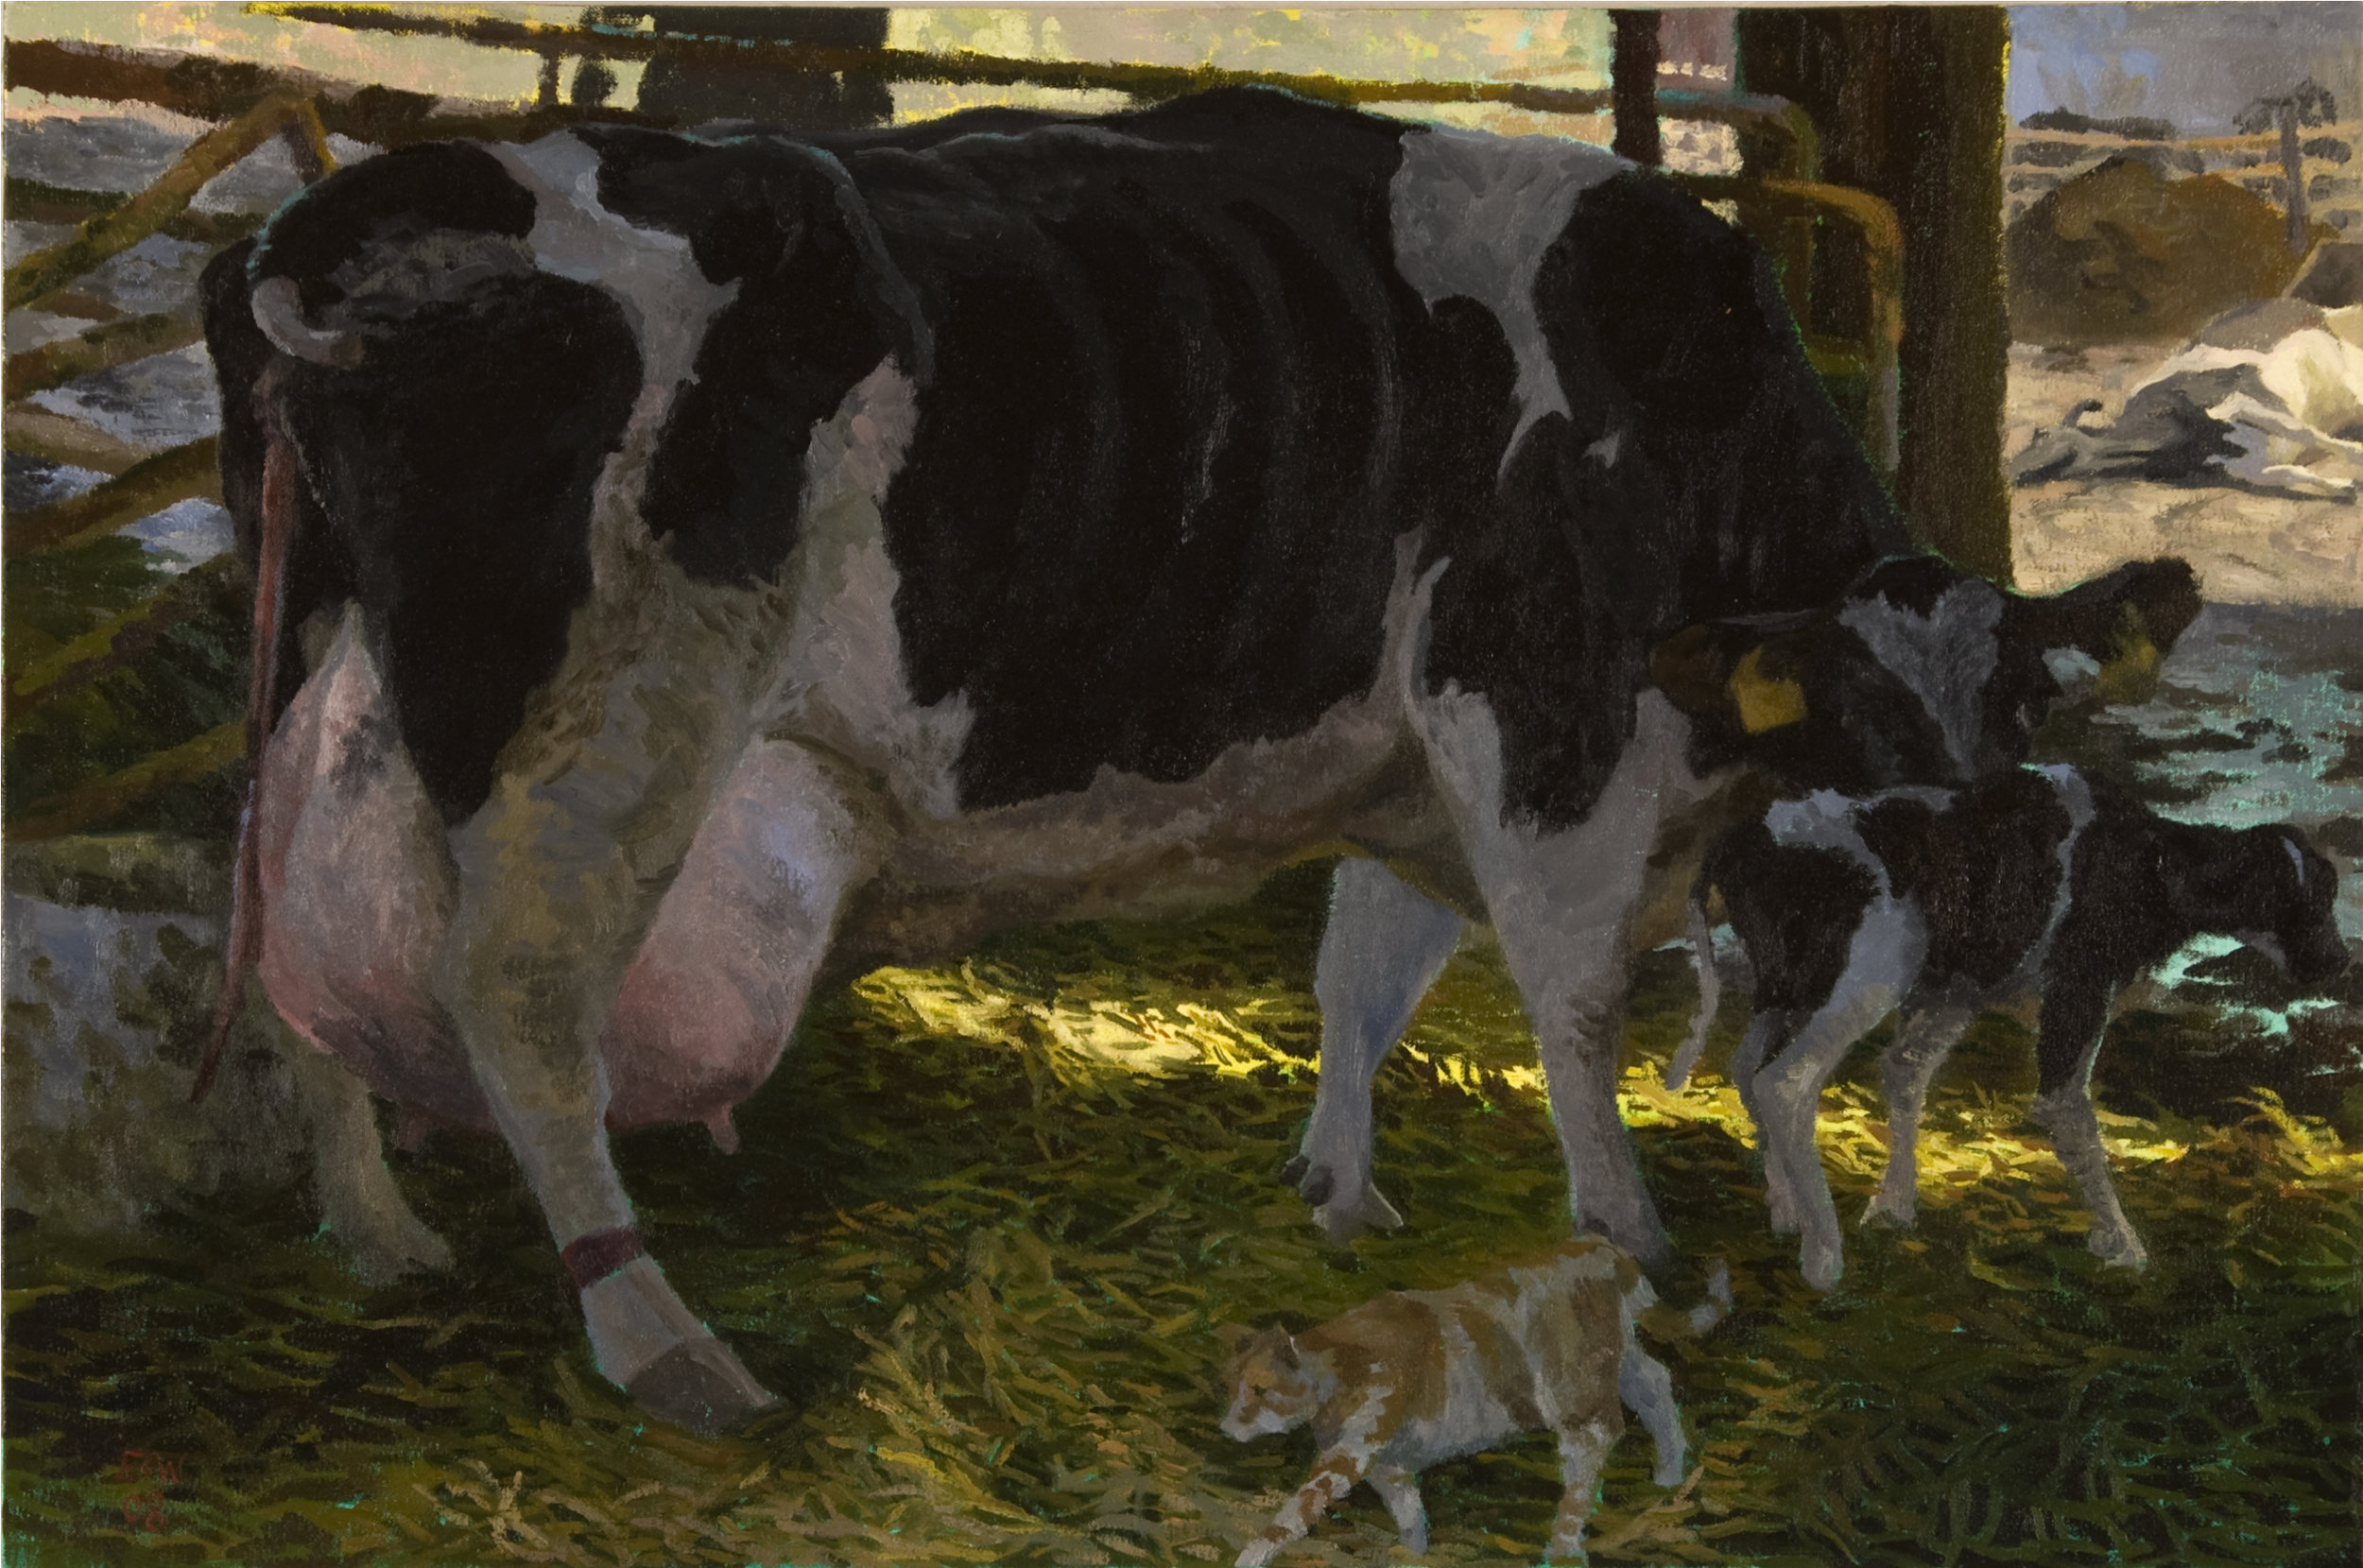 Cow and Calf Study for Cycle Of Life